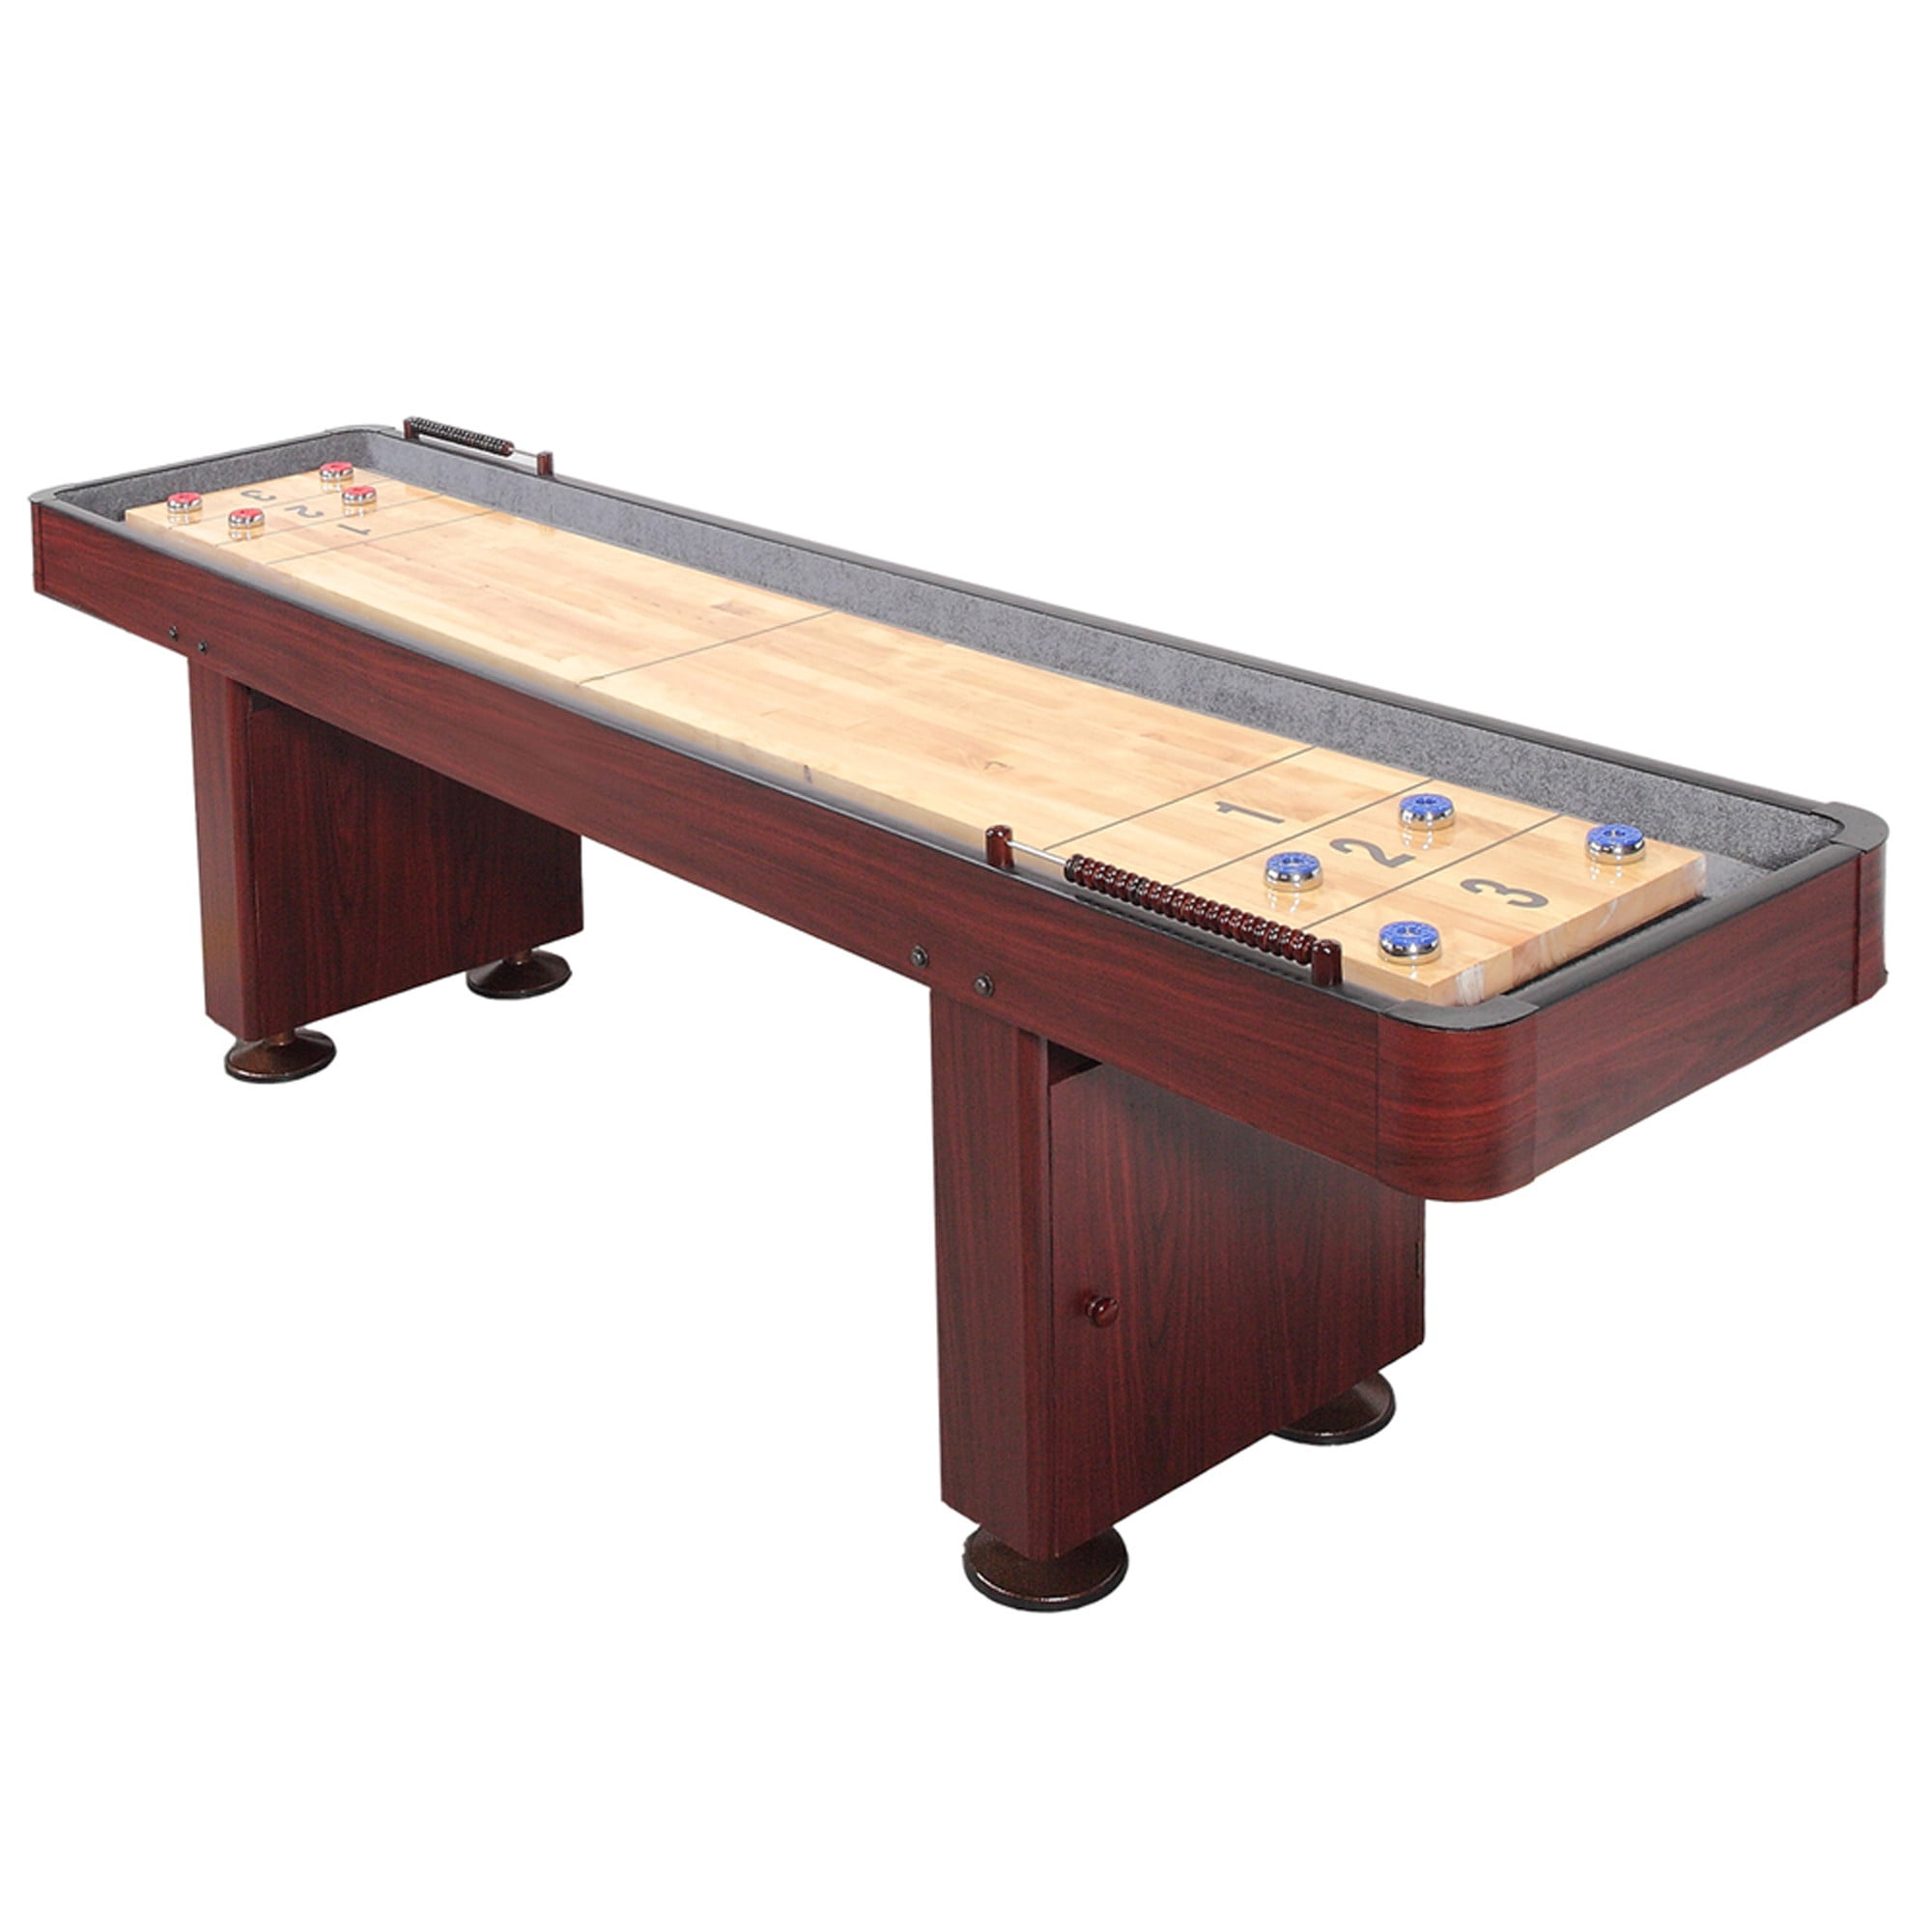 ATOMIC 9-Feet Platinum Shuffleboard Table Game Indoor Home Arcade for sale online 